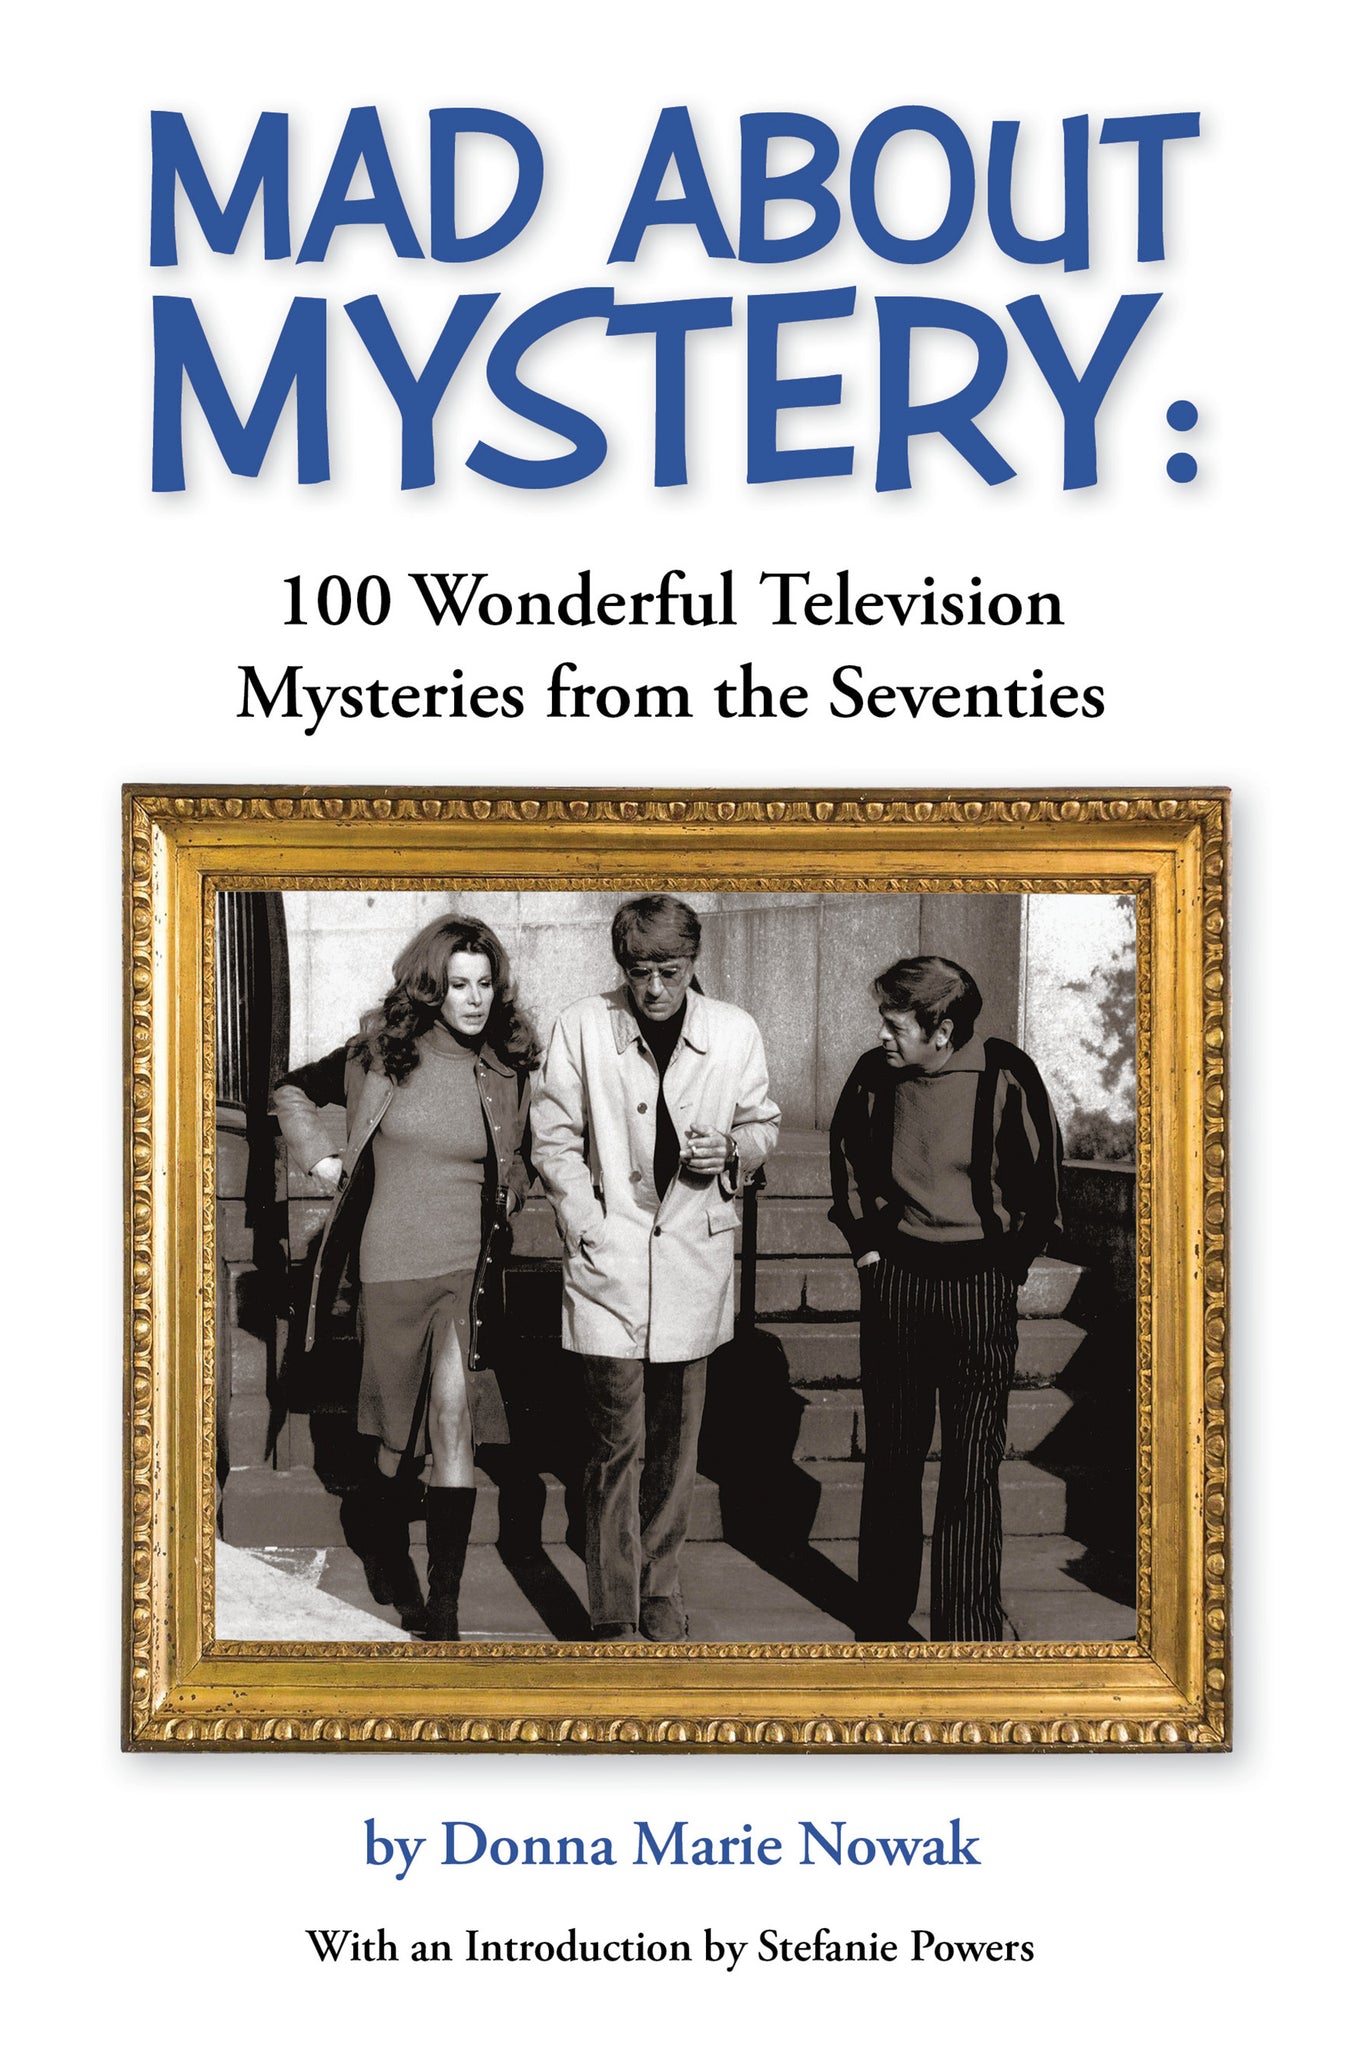 MAD ABOUT MYSTERY: 100 WONDERFUL TELEVISION MYSTERIES FROM THE SEVENTIES (hardback)